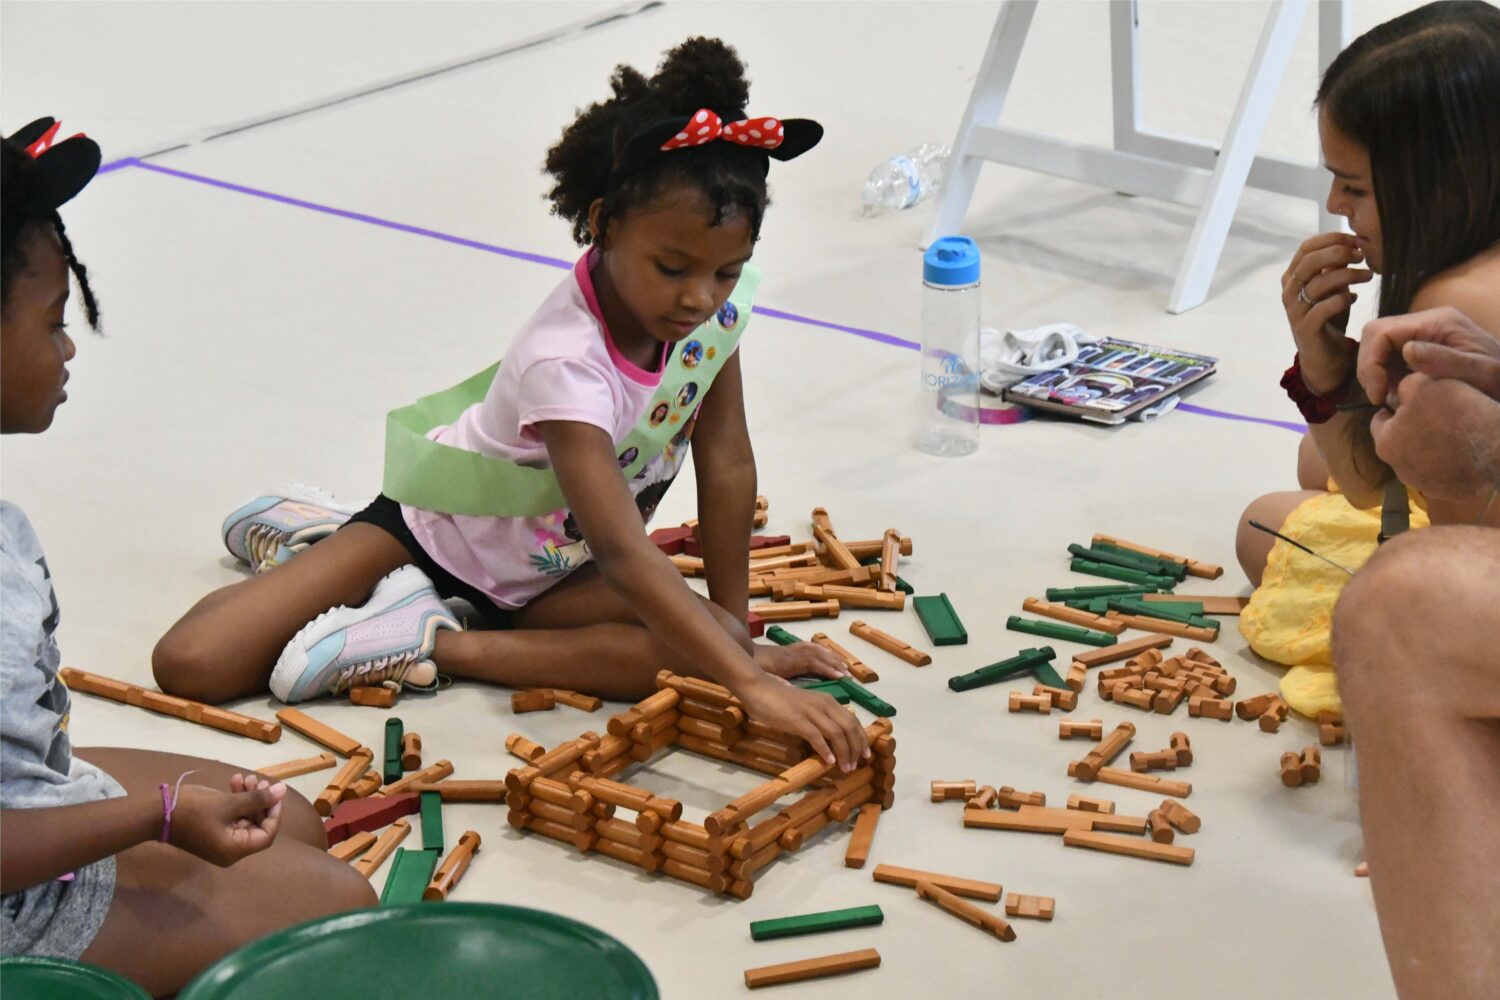 Horizons-at-The-Ethel-Walker-School-Student-Uses-lincoln-logs-during-Annual-STEAM-Expo